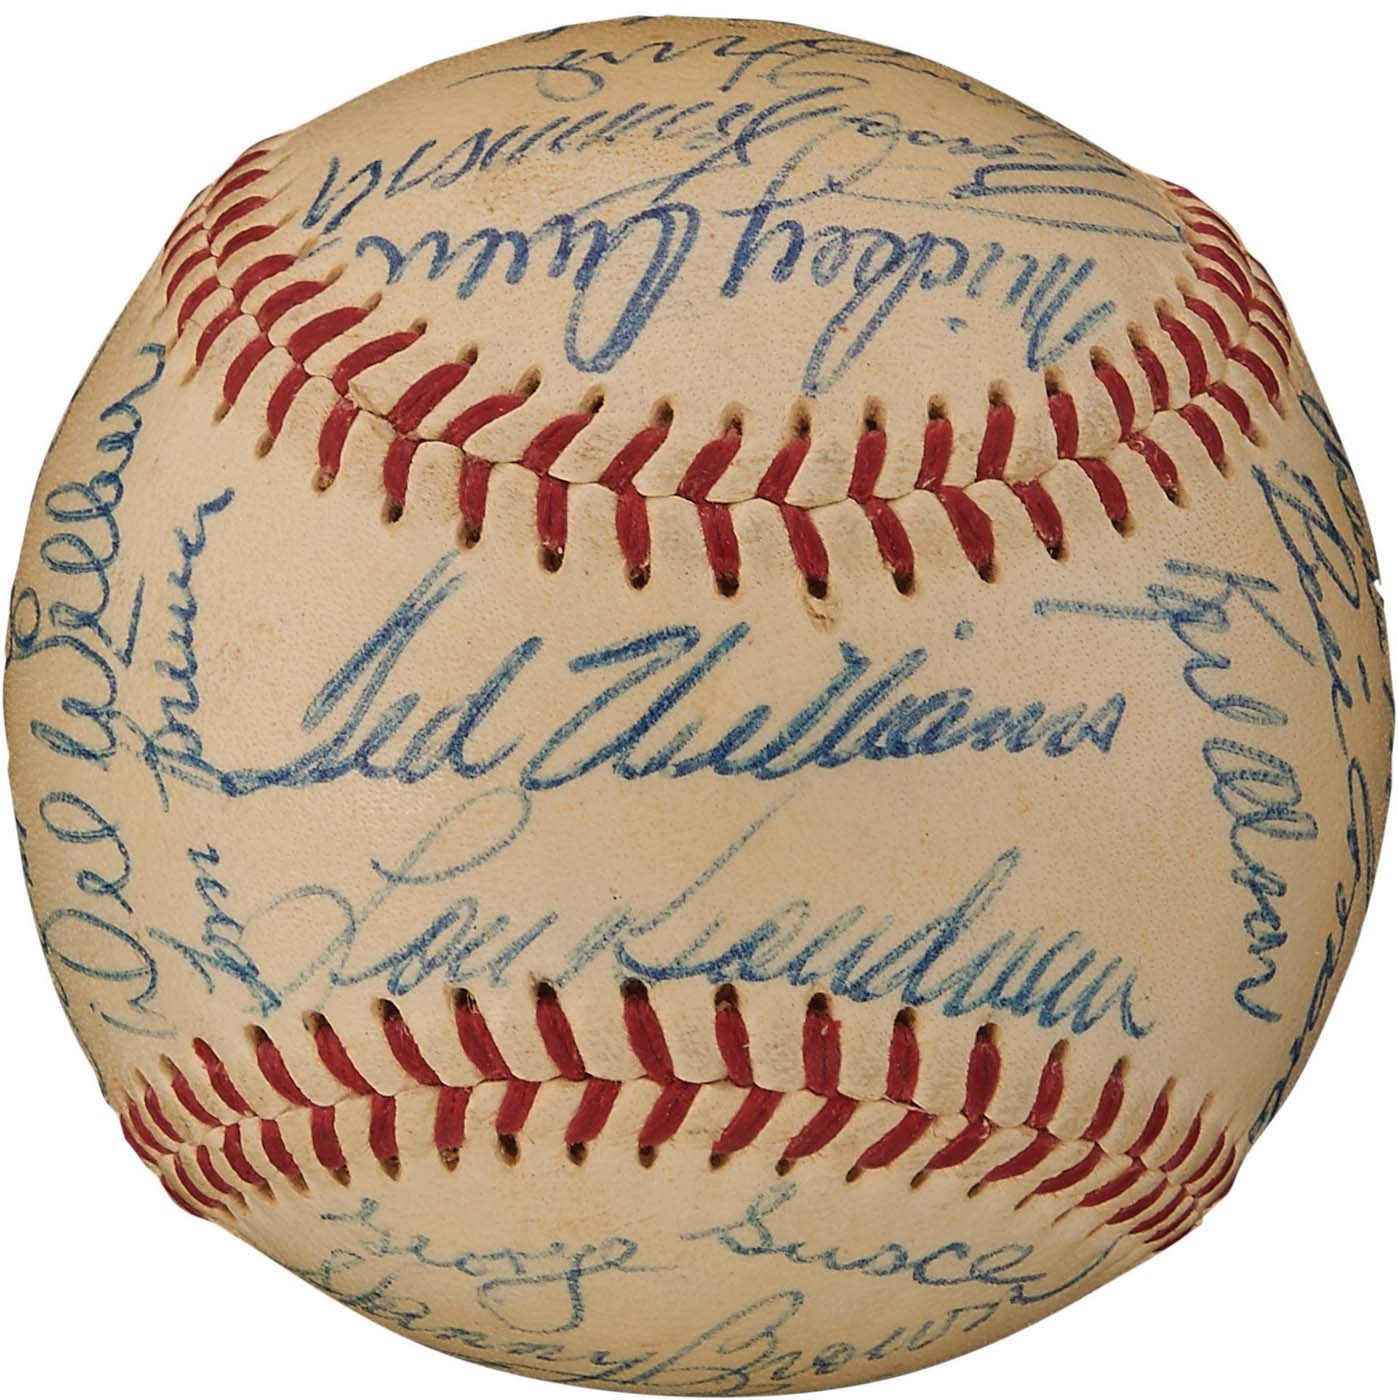 - 1954 Boston Red Sox Team-Signed Baseball with Harry Agganis (PSA NM+ 7.5)